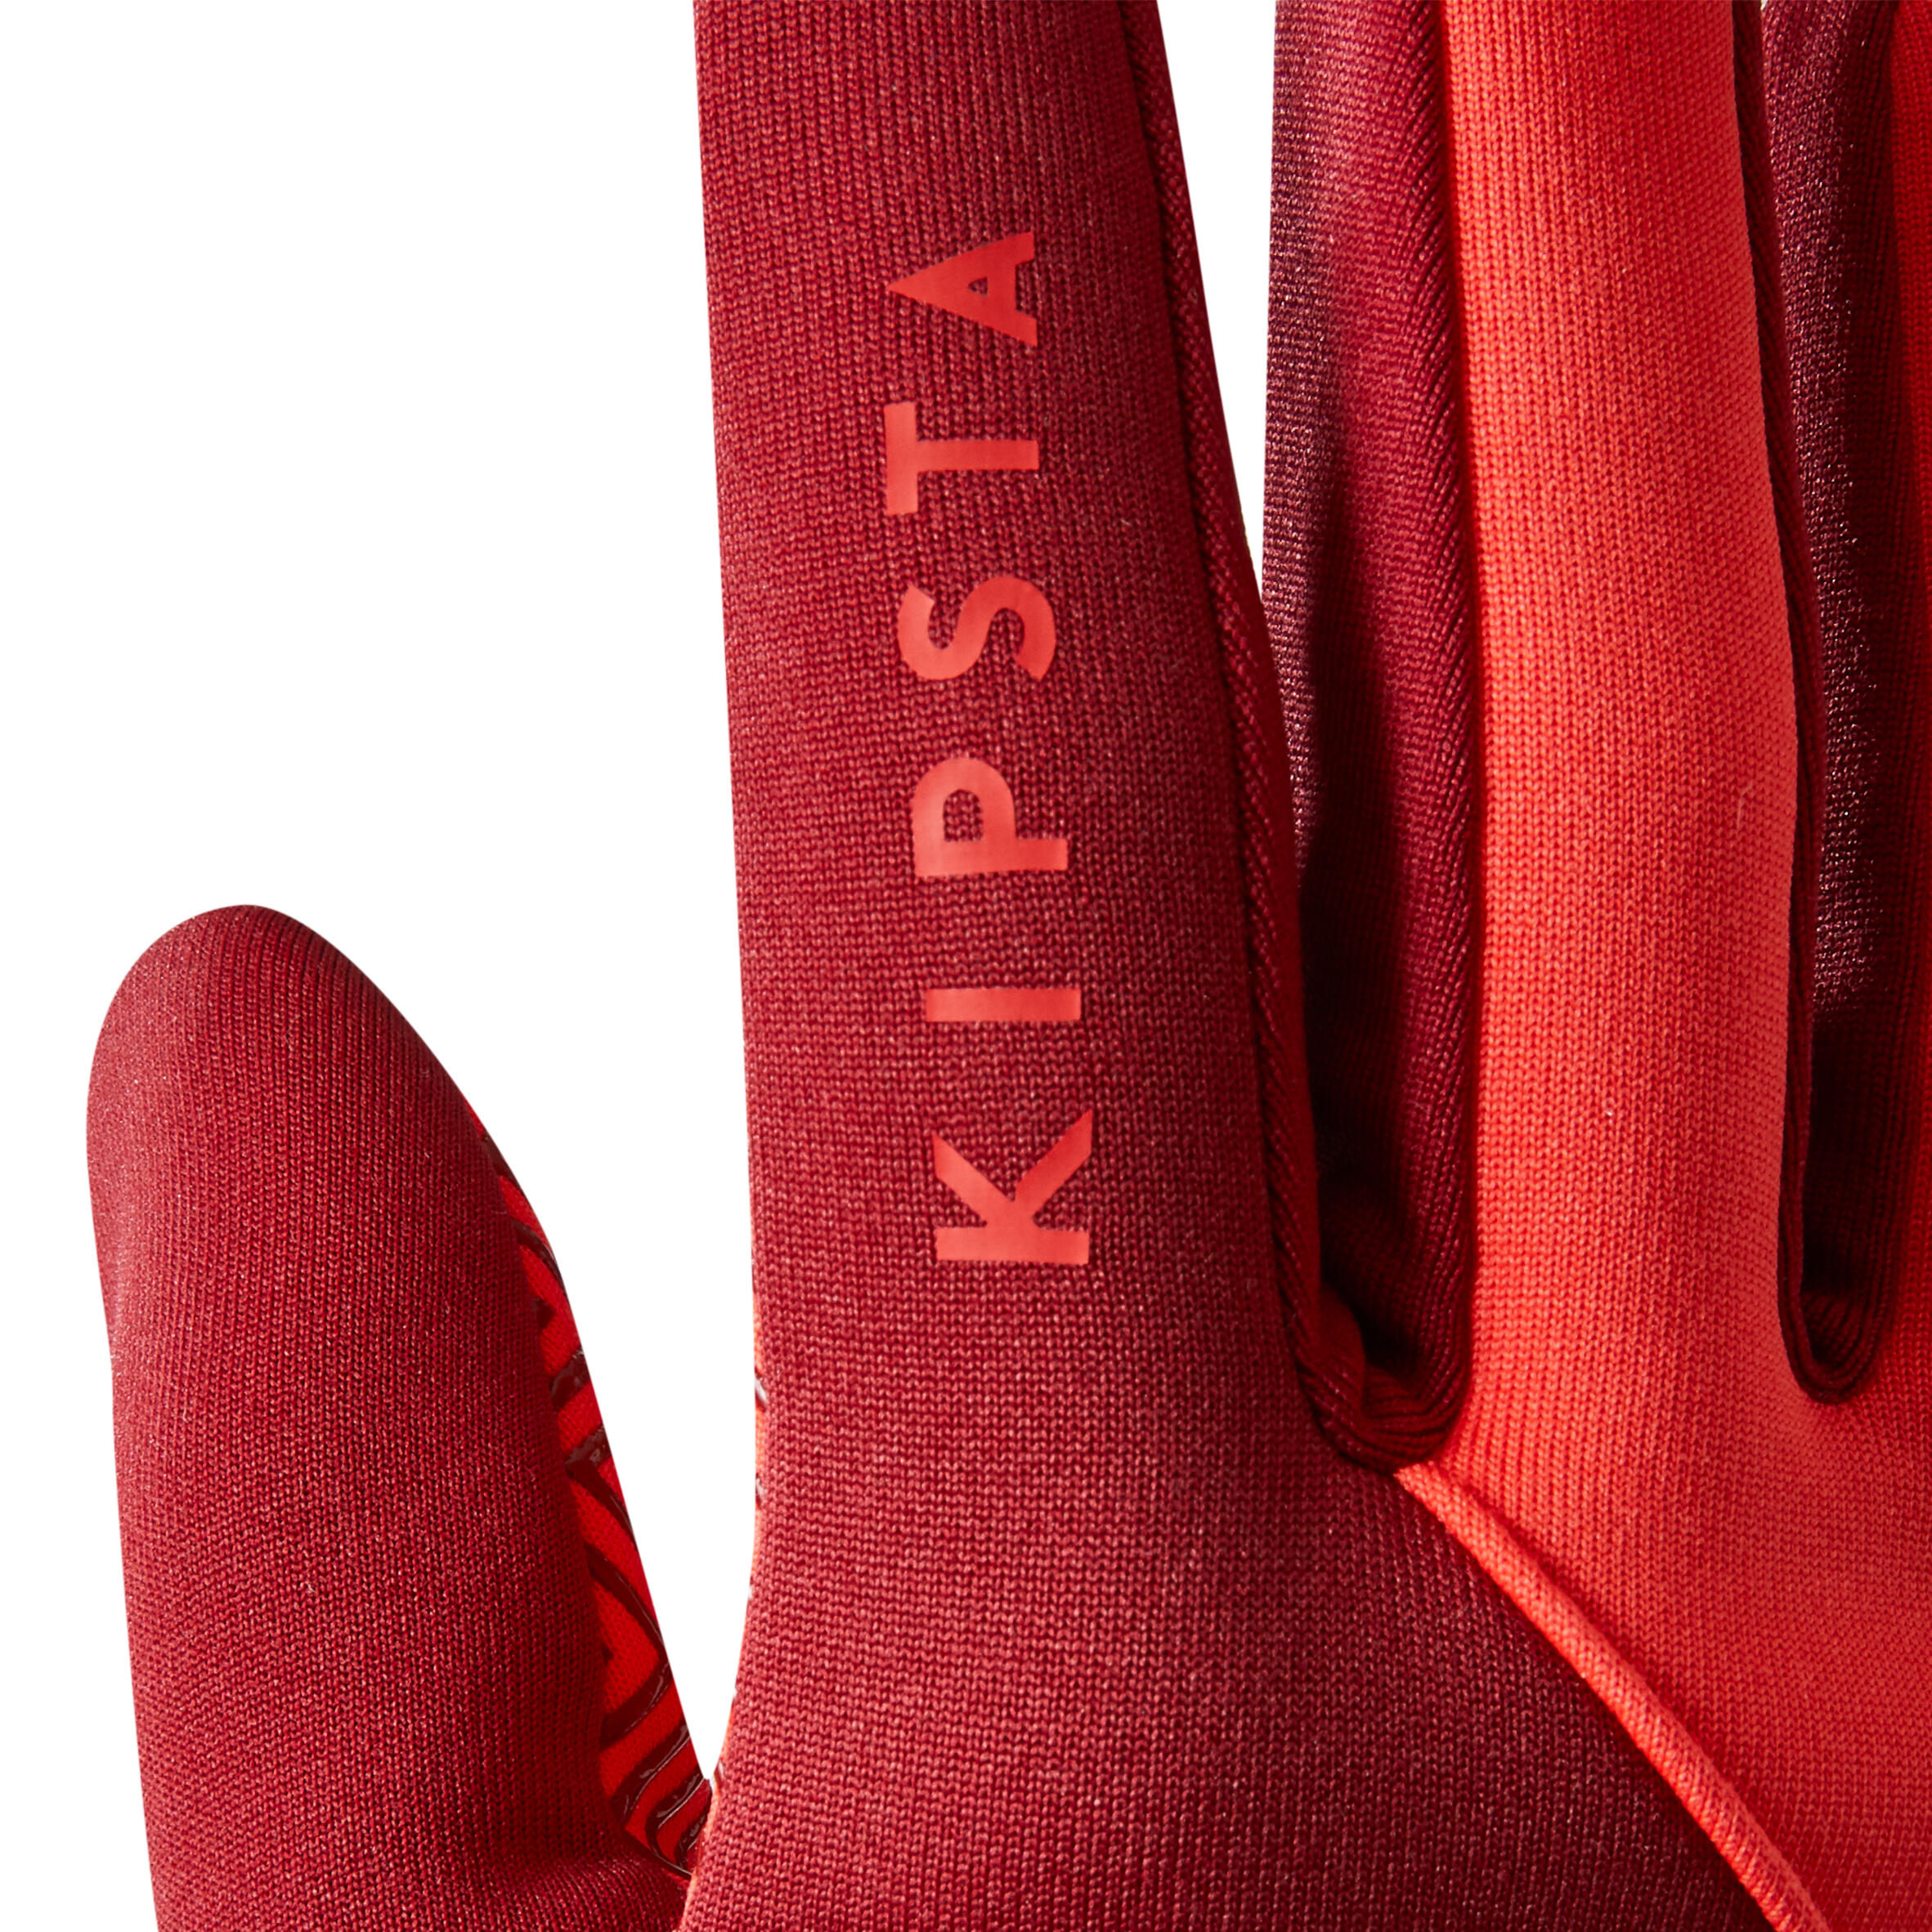 Adult water repellent football gloves, red 5/5